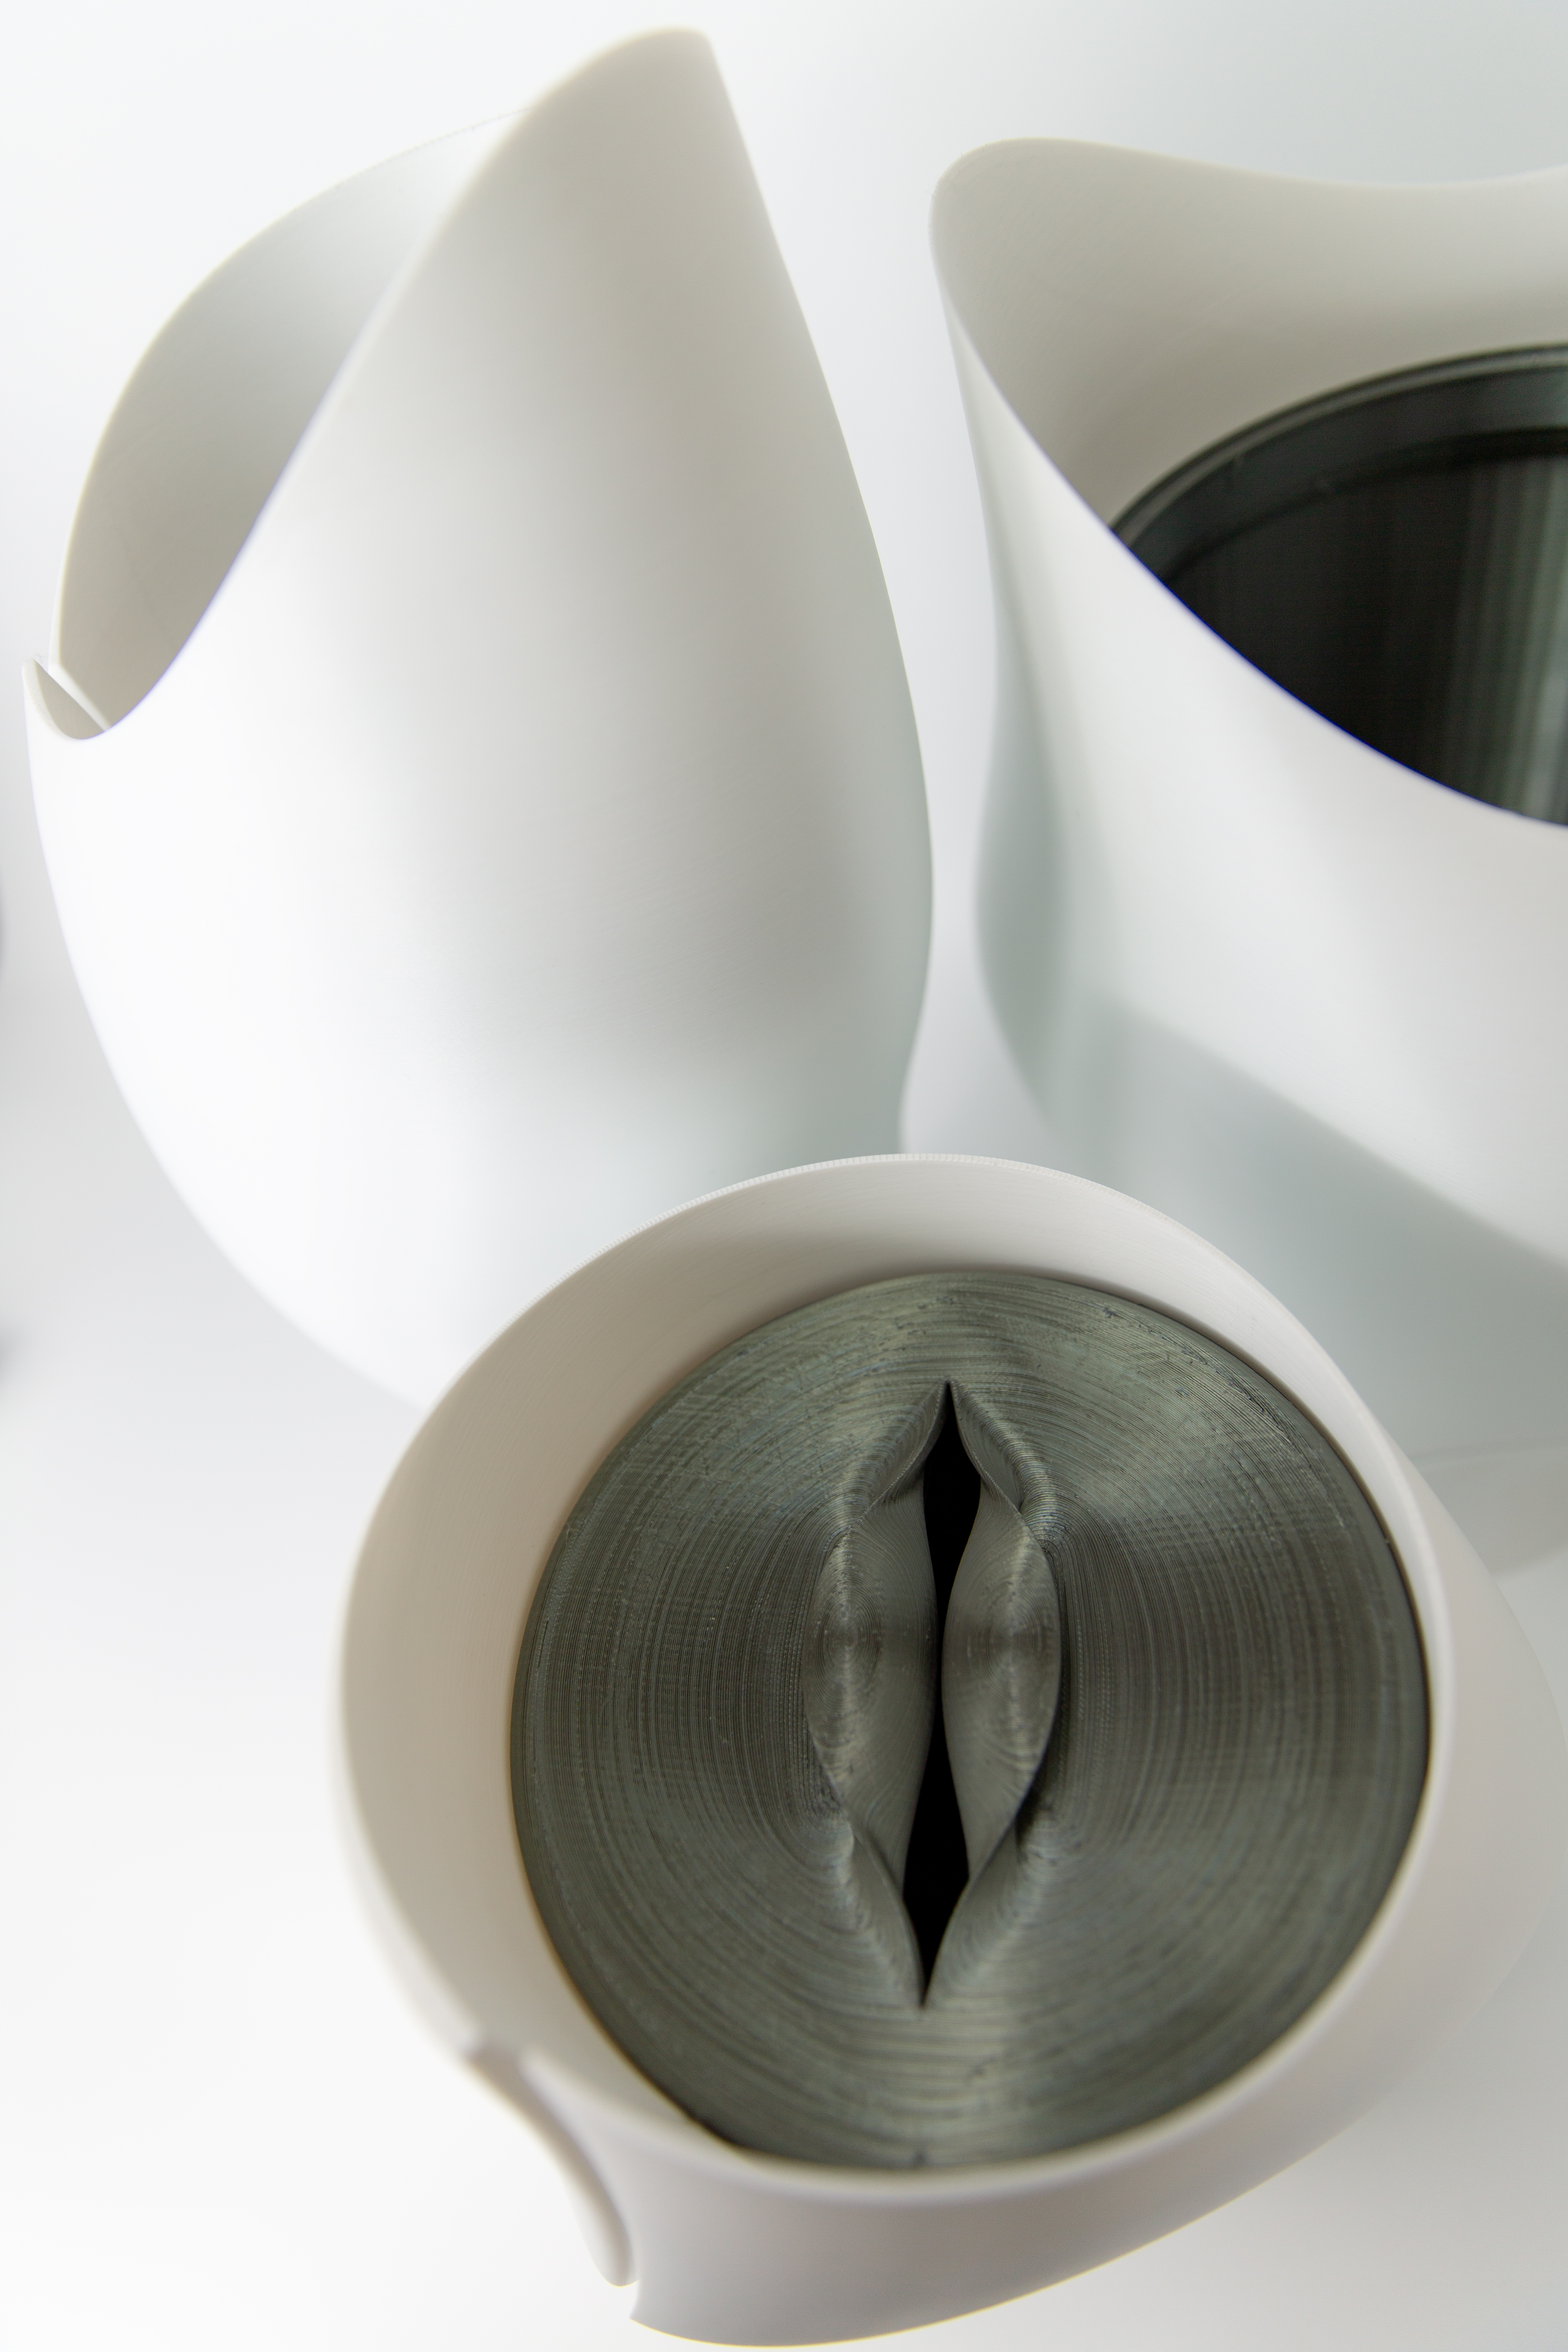 Detail Photograph of Three Waste Bins Designed for an Architect's Wife Highlighting the Lid of the Wet Bin, 3-D Printed Prototypes, Wet, Dry & Recycle β, A Preview of New Work Currently in Development: Three Waste Bins, J.Travis Bennett Russett